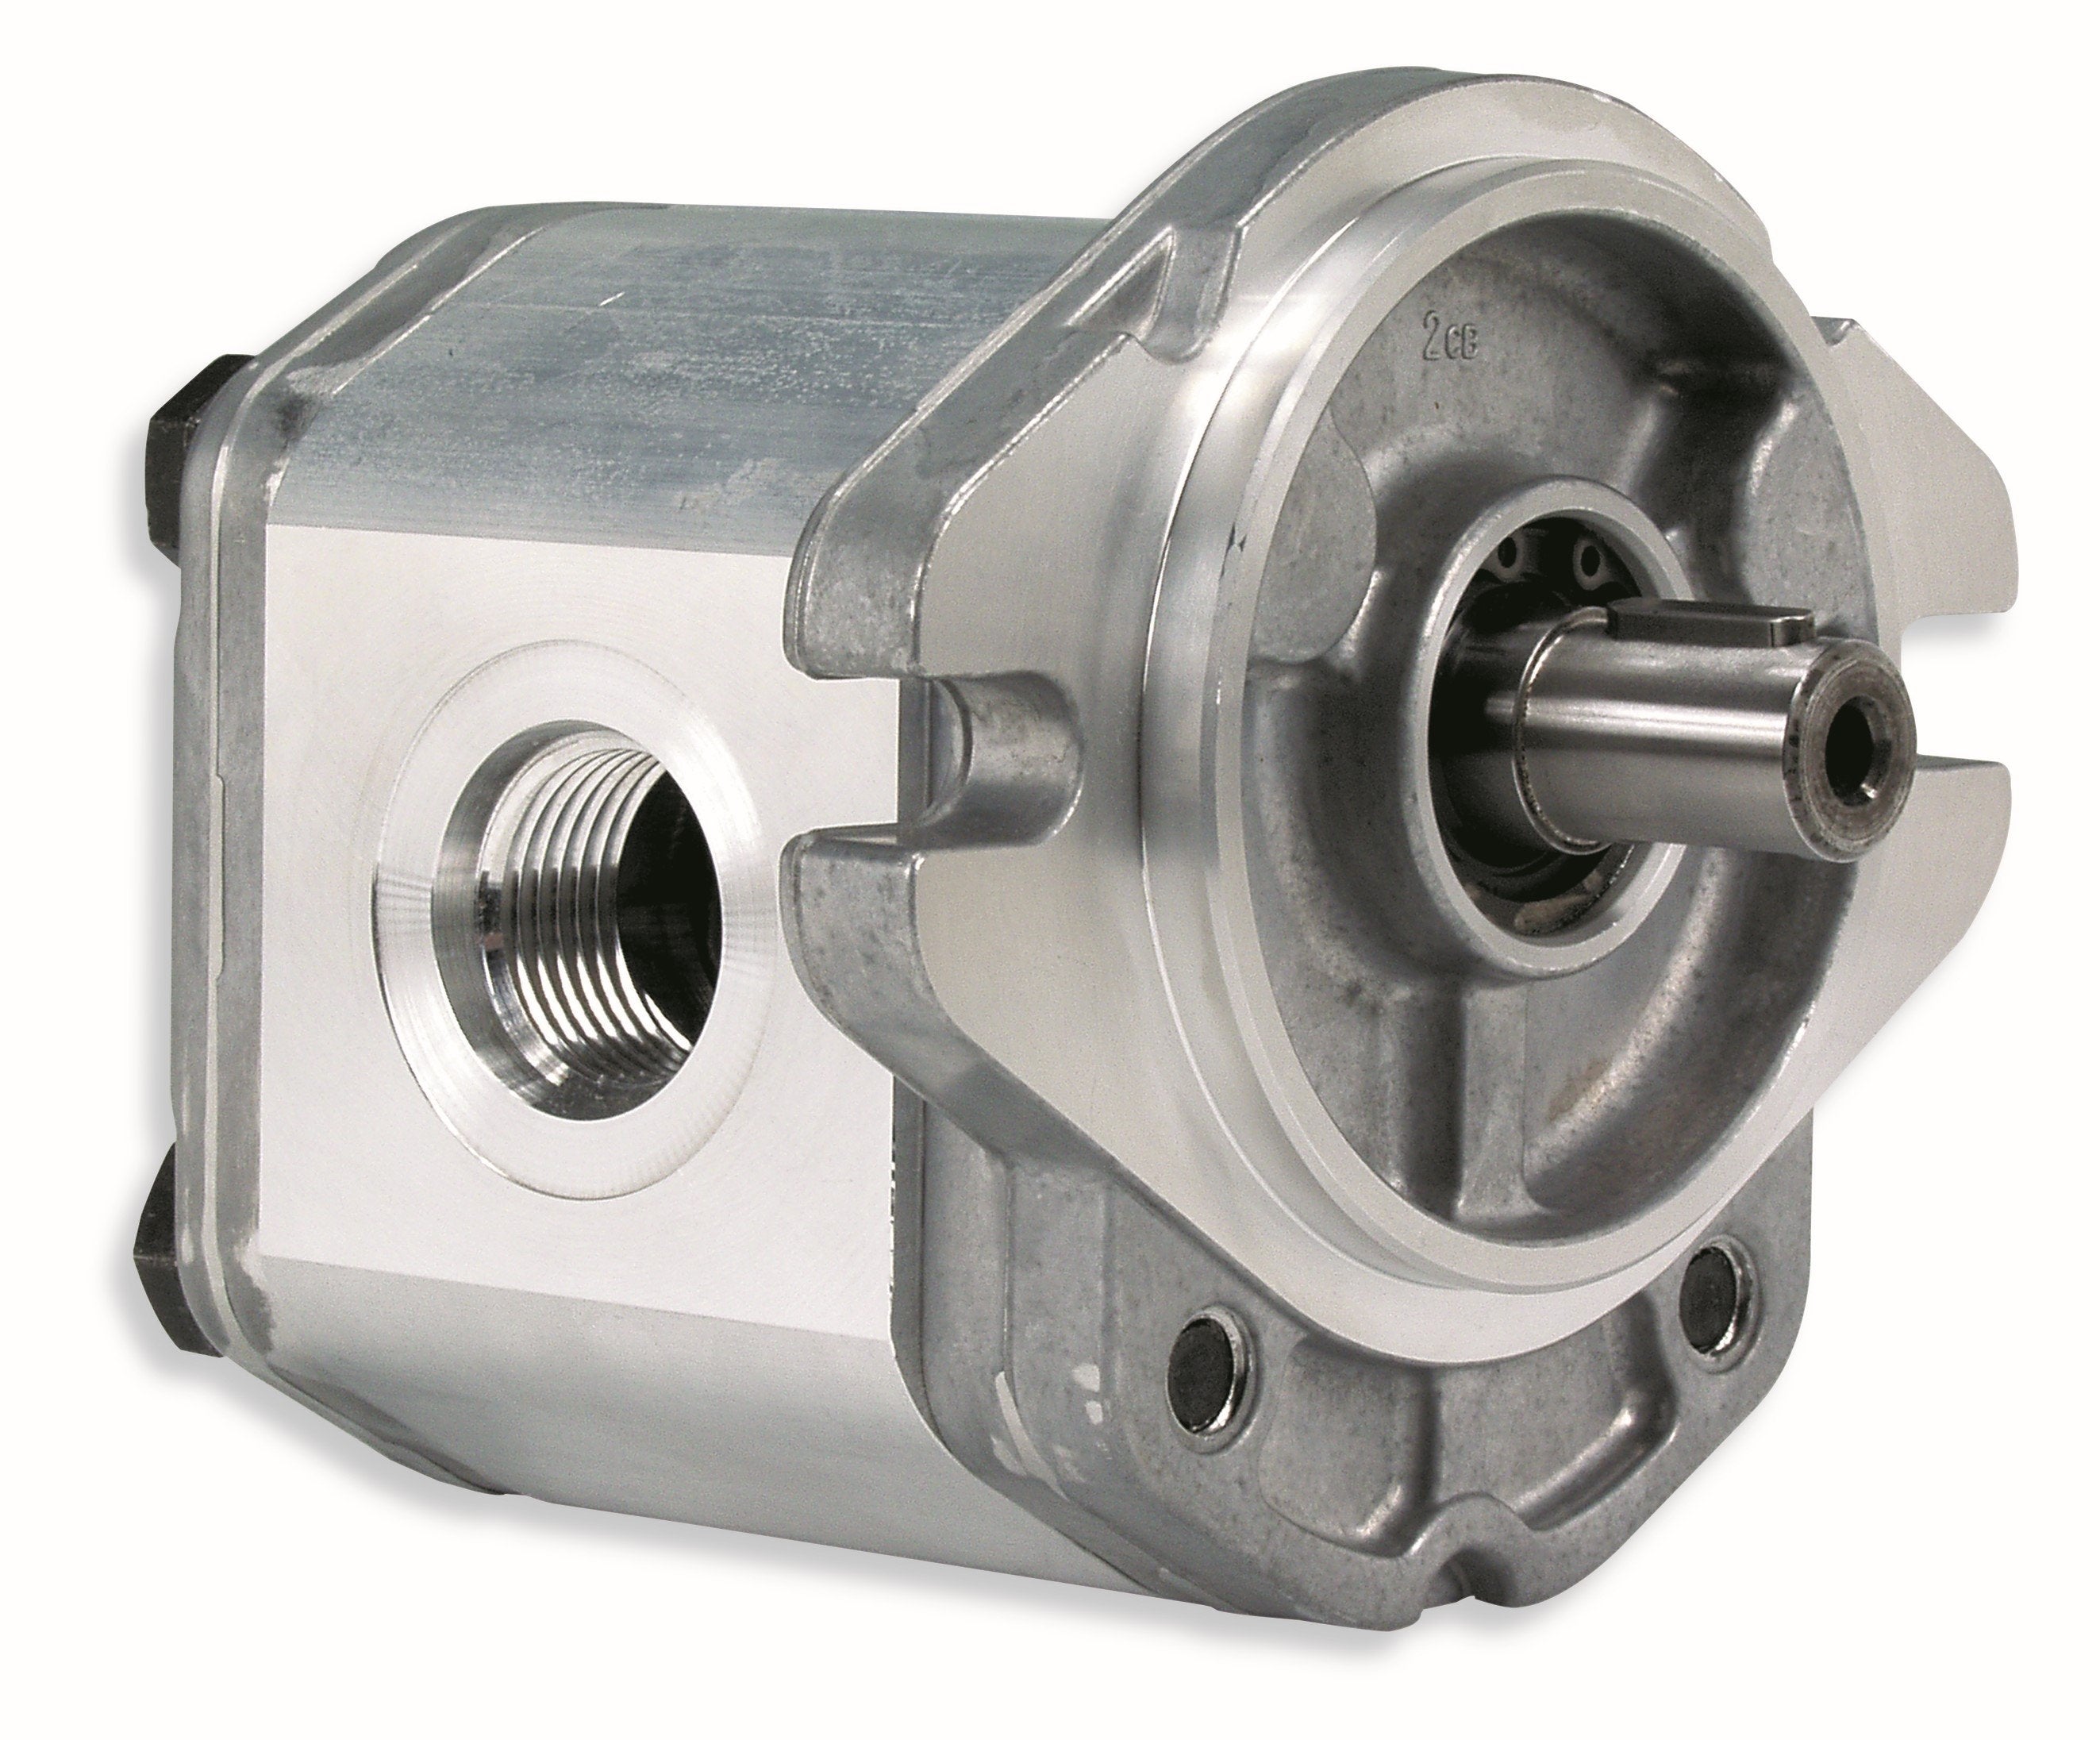 GHM3A-R-80-E4 : Marzocchi Gear Motor, Bidirectional, 52cc, 3335psi rated, 2500RPM, 1" Code 61 ports, 7/8" Bore x 1/4" Keyed Shaft